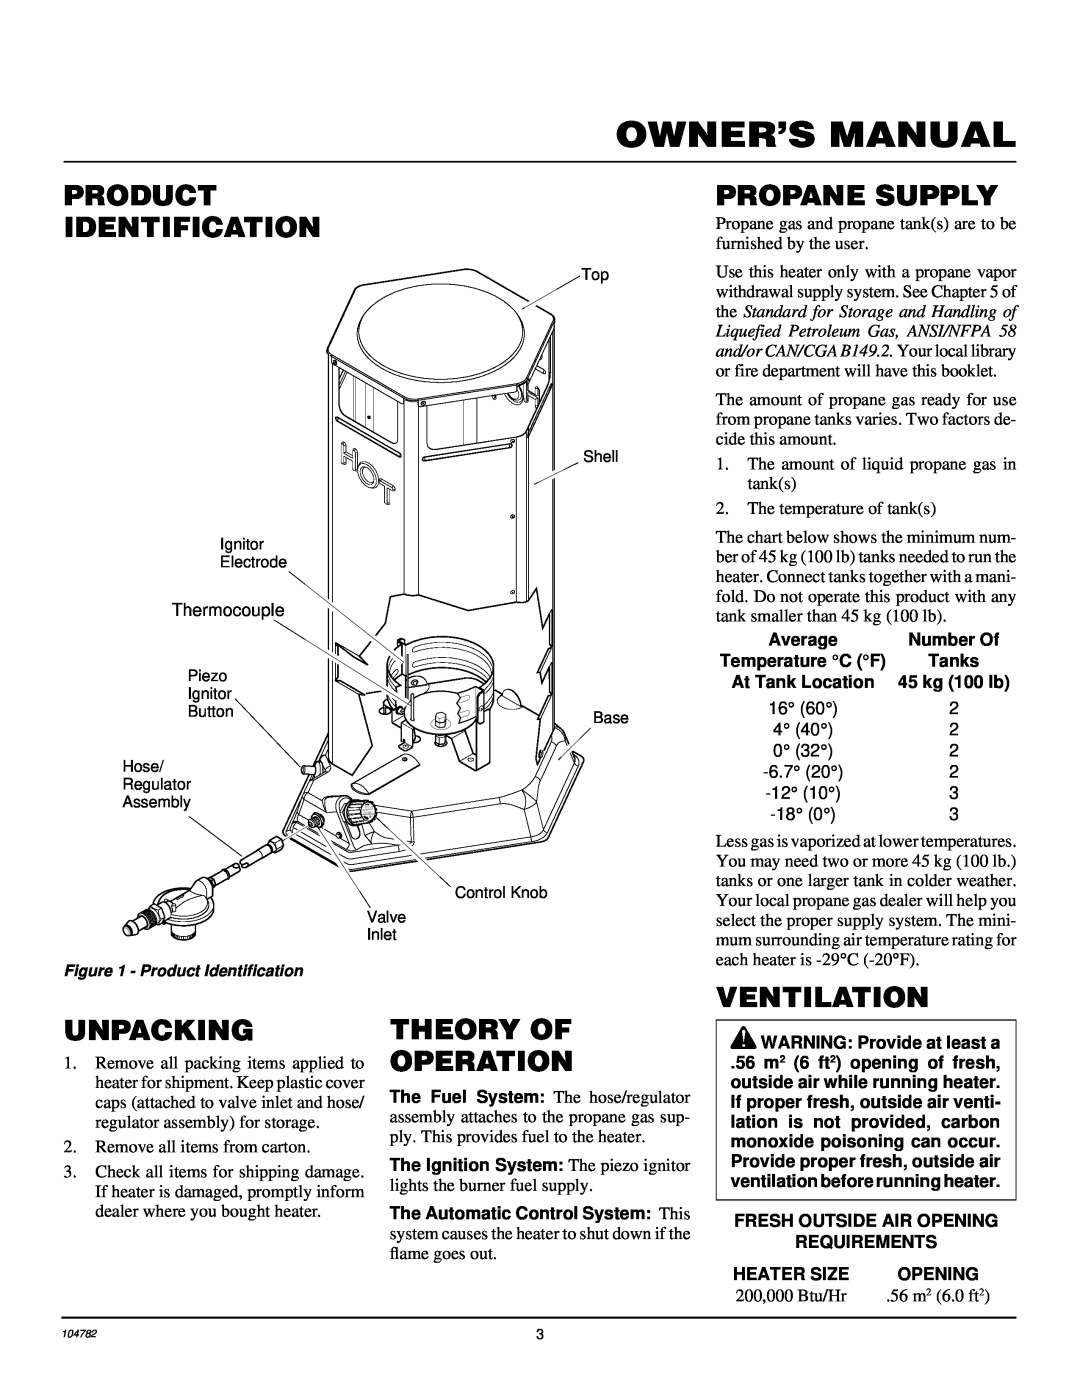 Desa RCCP200V owner manual Product Identification, Propane Supply, Ventilation, Unpacking, Theory Of Operation 